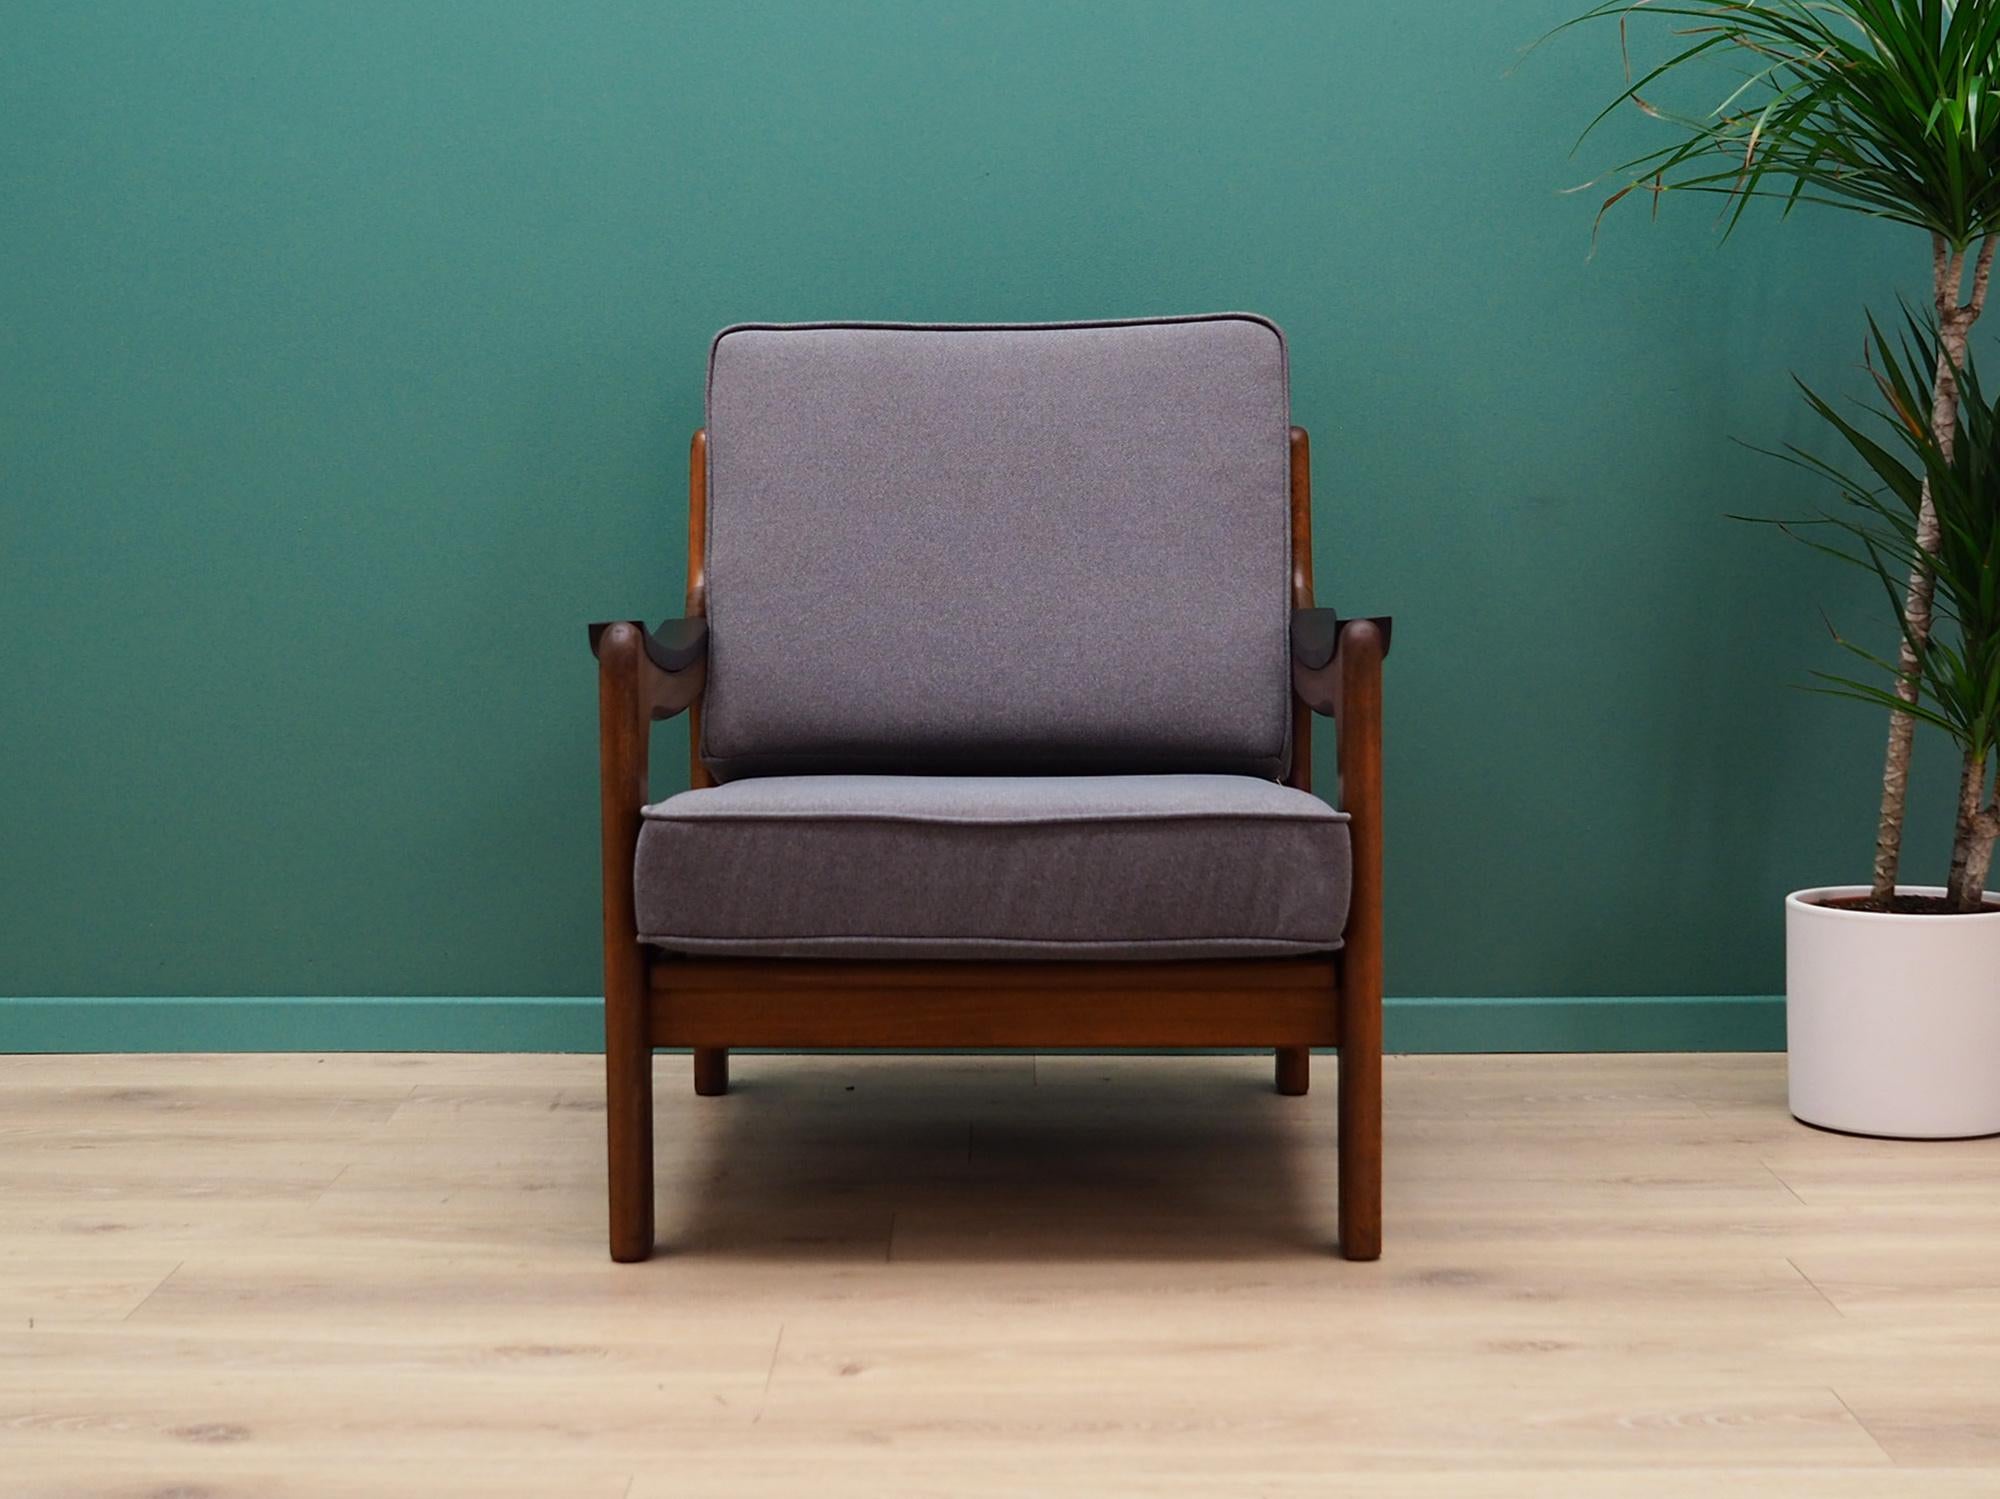 Superb armchair from the 1960s-1970s. Scandinavian design, Minimalist form. New upholstery made of grey fabric, construction made of solid teak wood. Preserved in good condition (small bruises and scratches on wood), directly for use.

Dimensions: